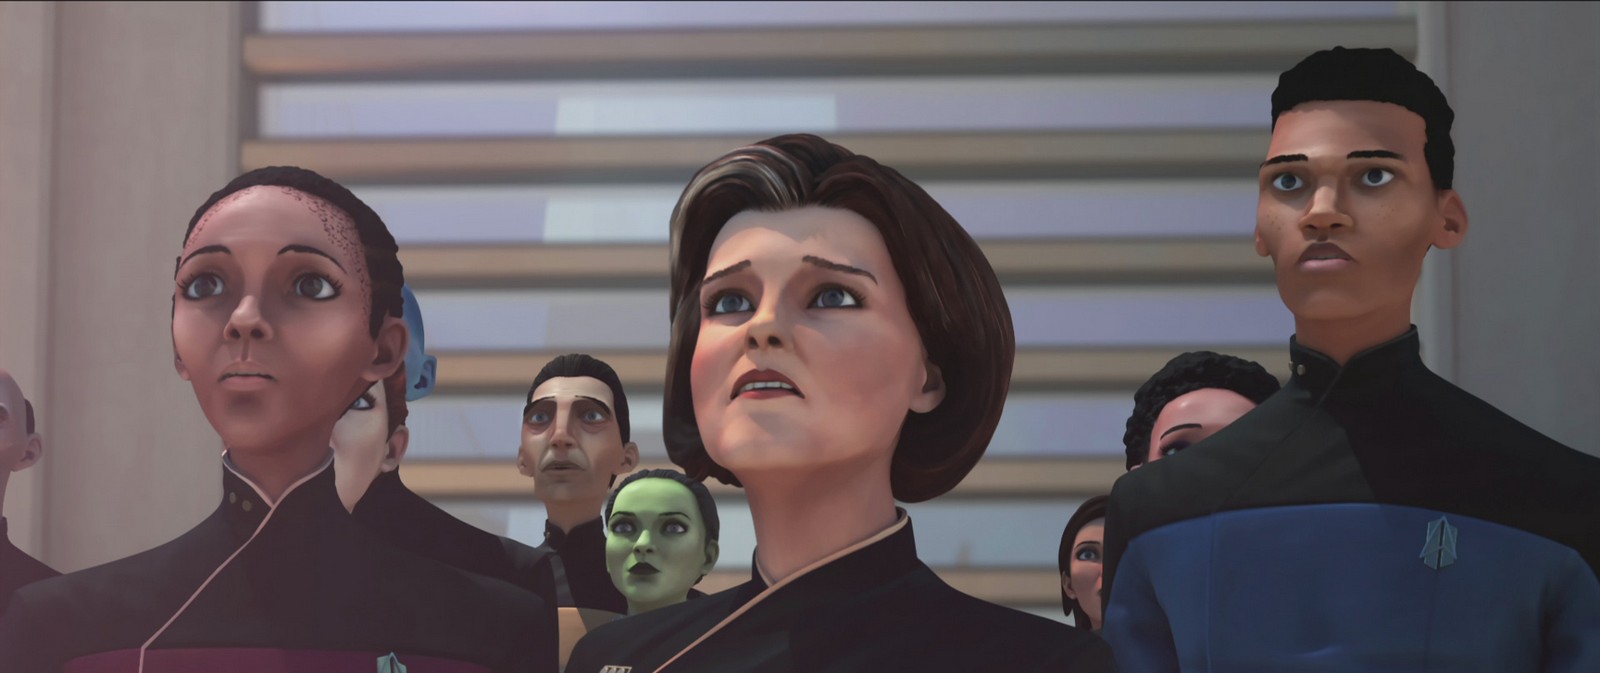 Janeway and other officers watch as the Protostar shuttle descends